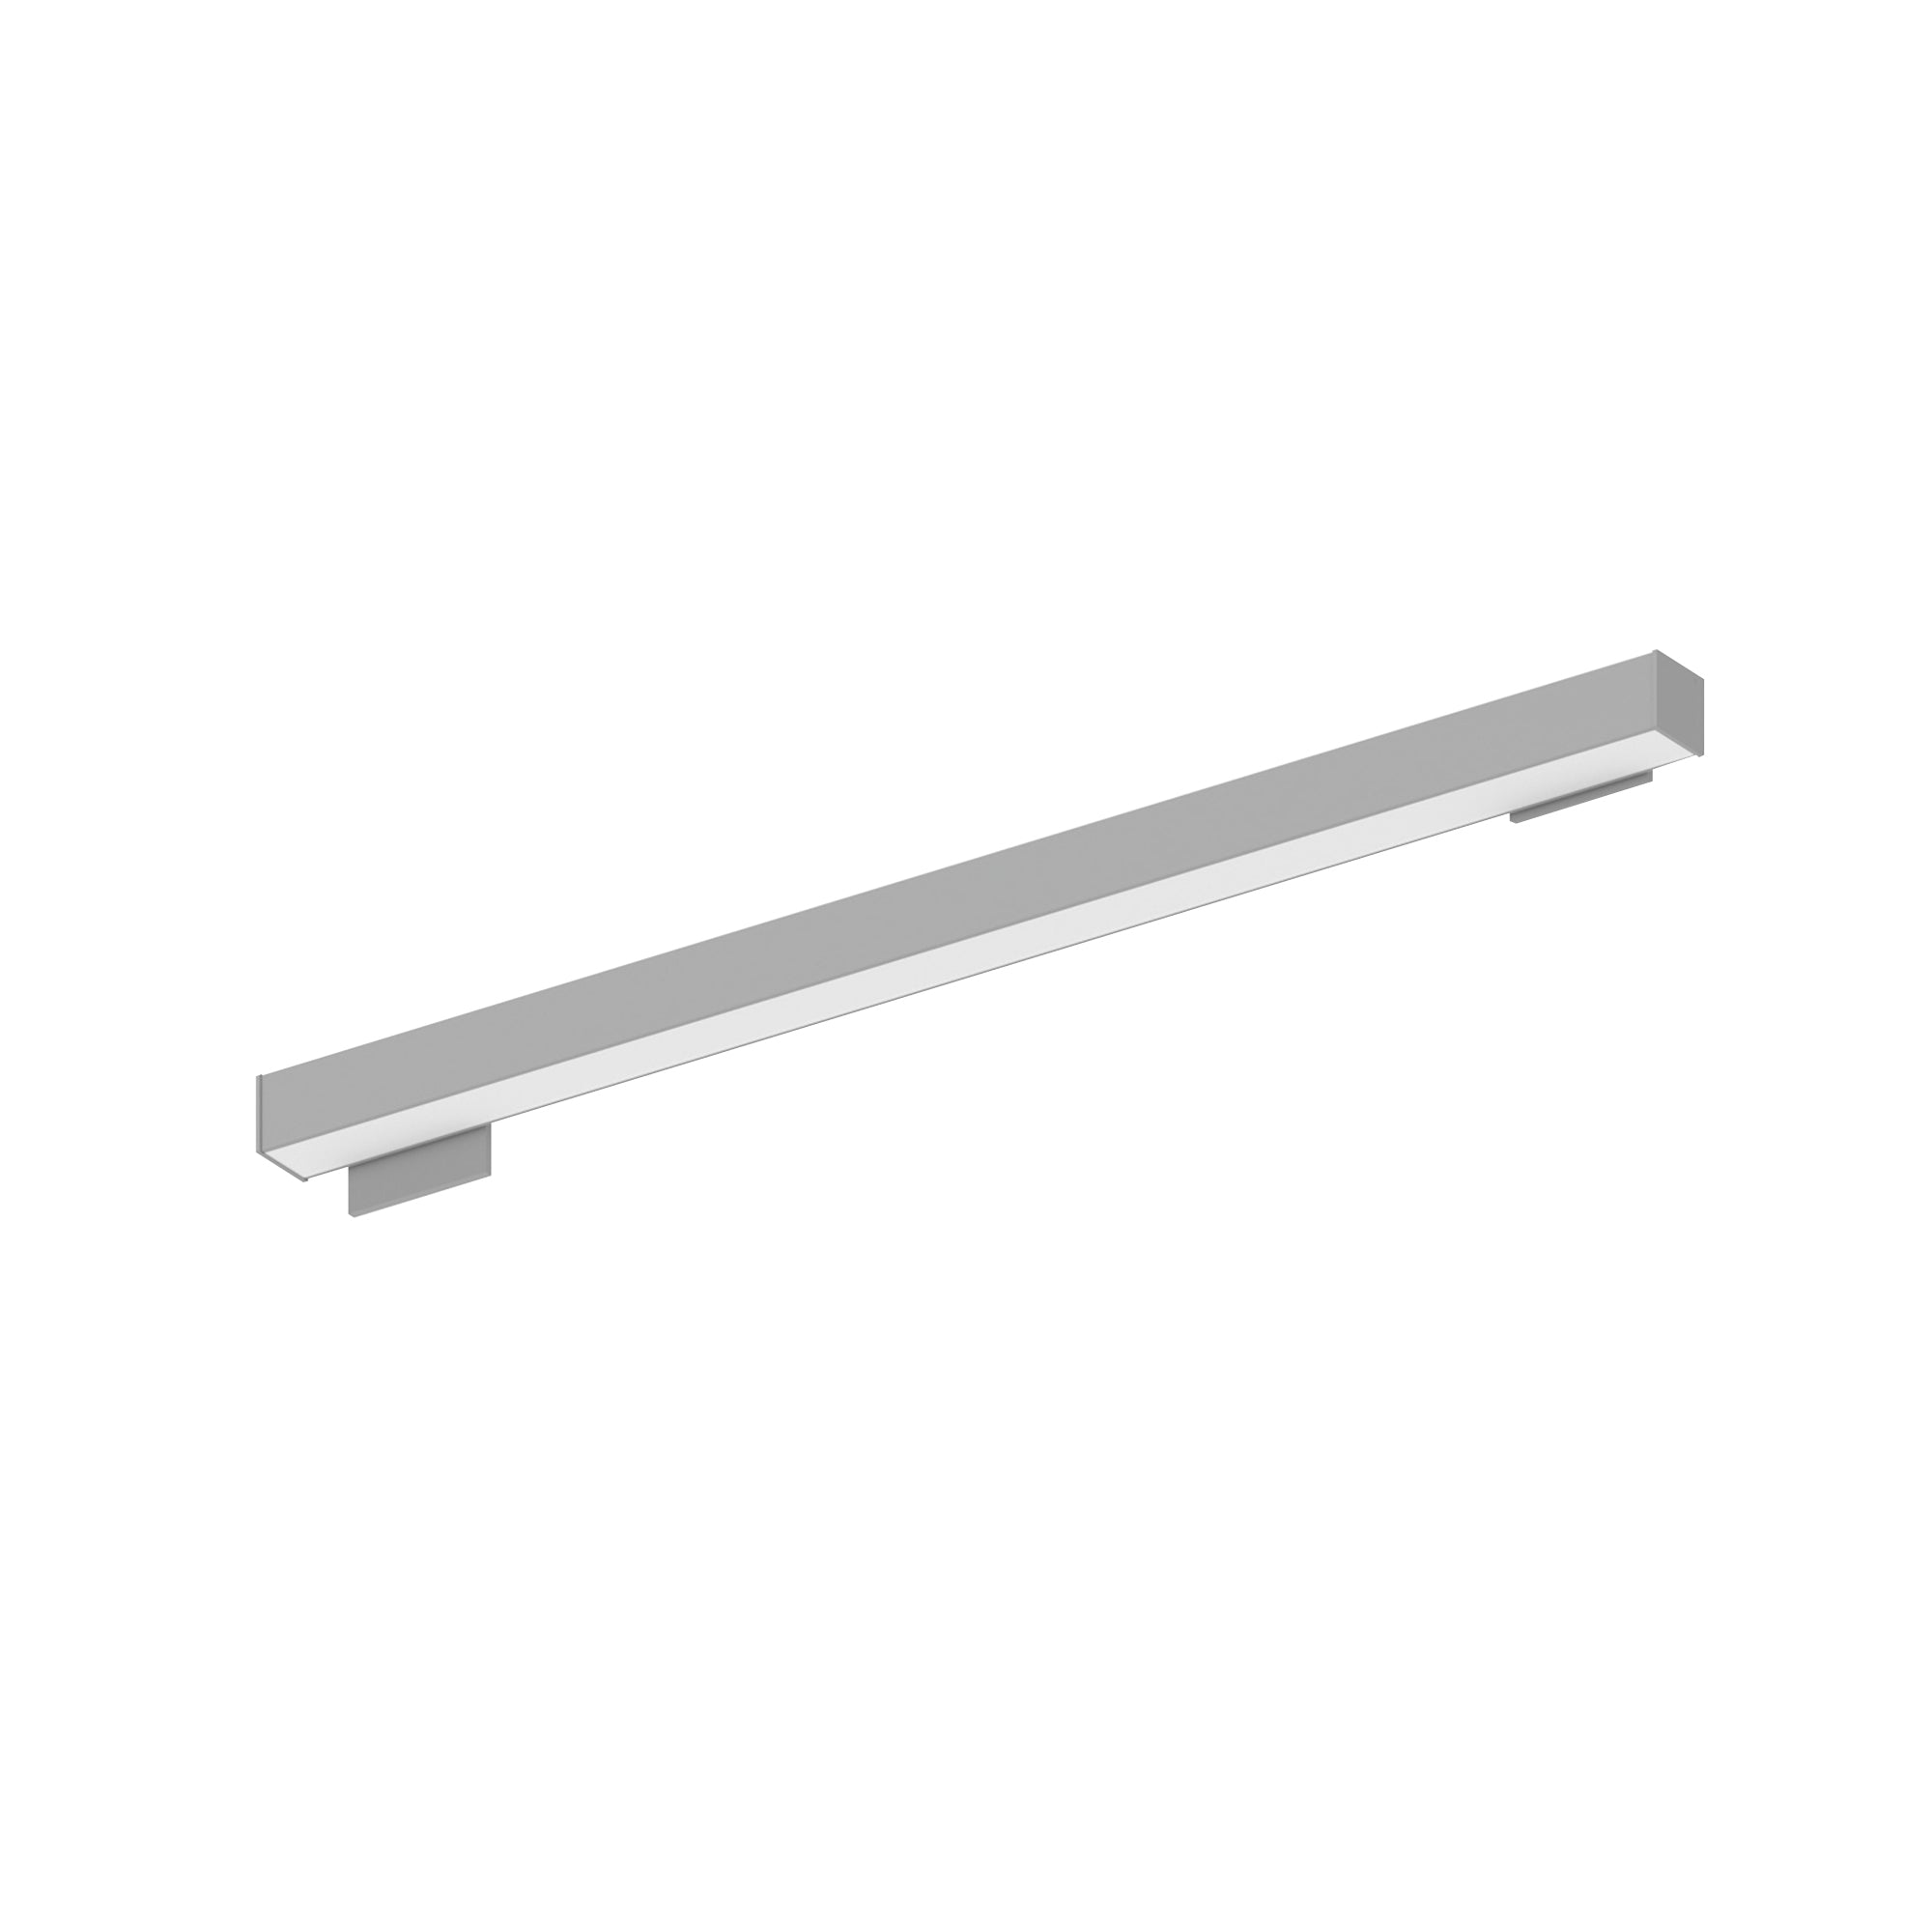 Nora Lighting NWLIN-41035A/L4-R2P - Linear - 4' L-Line LED Wall Mount Linear, 4200lm / 3500K, 4 Inchx4 Inch Left Plate & 2 Inchx4 Inch Right Plate, Right Power Feed, Aluminum Finish